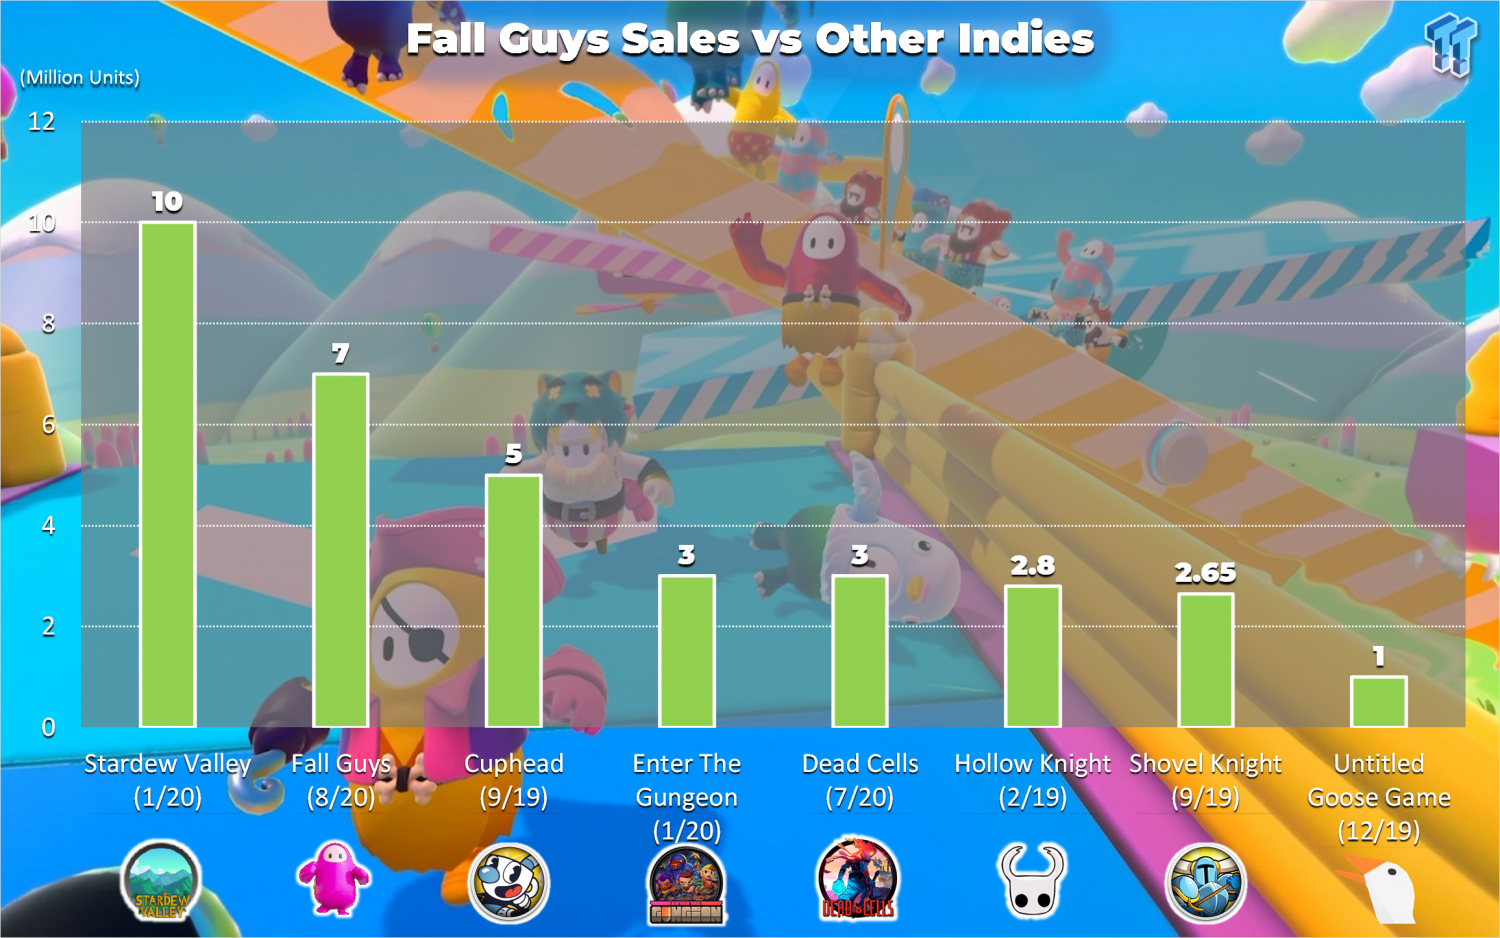 Fall Guys has sold more than 10 million copies on Steam alone